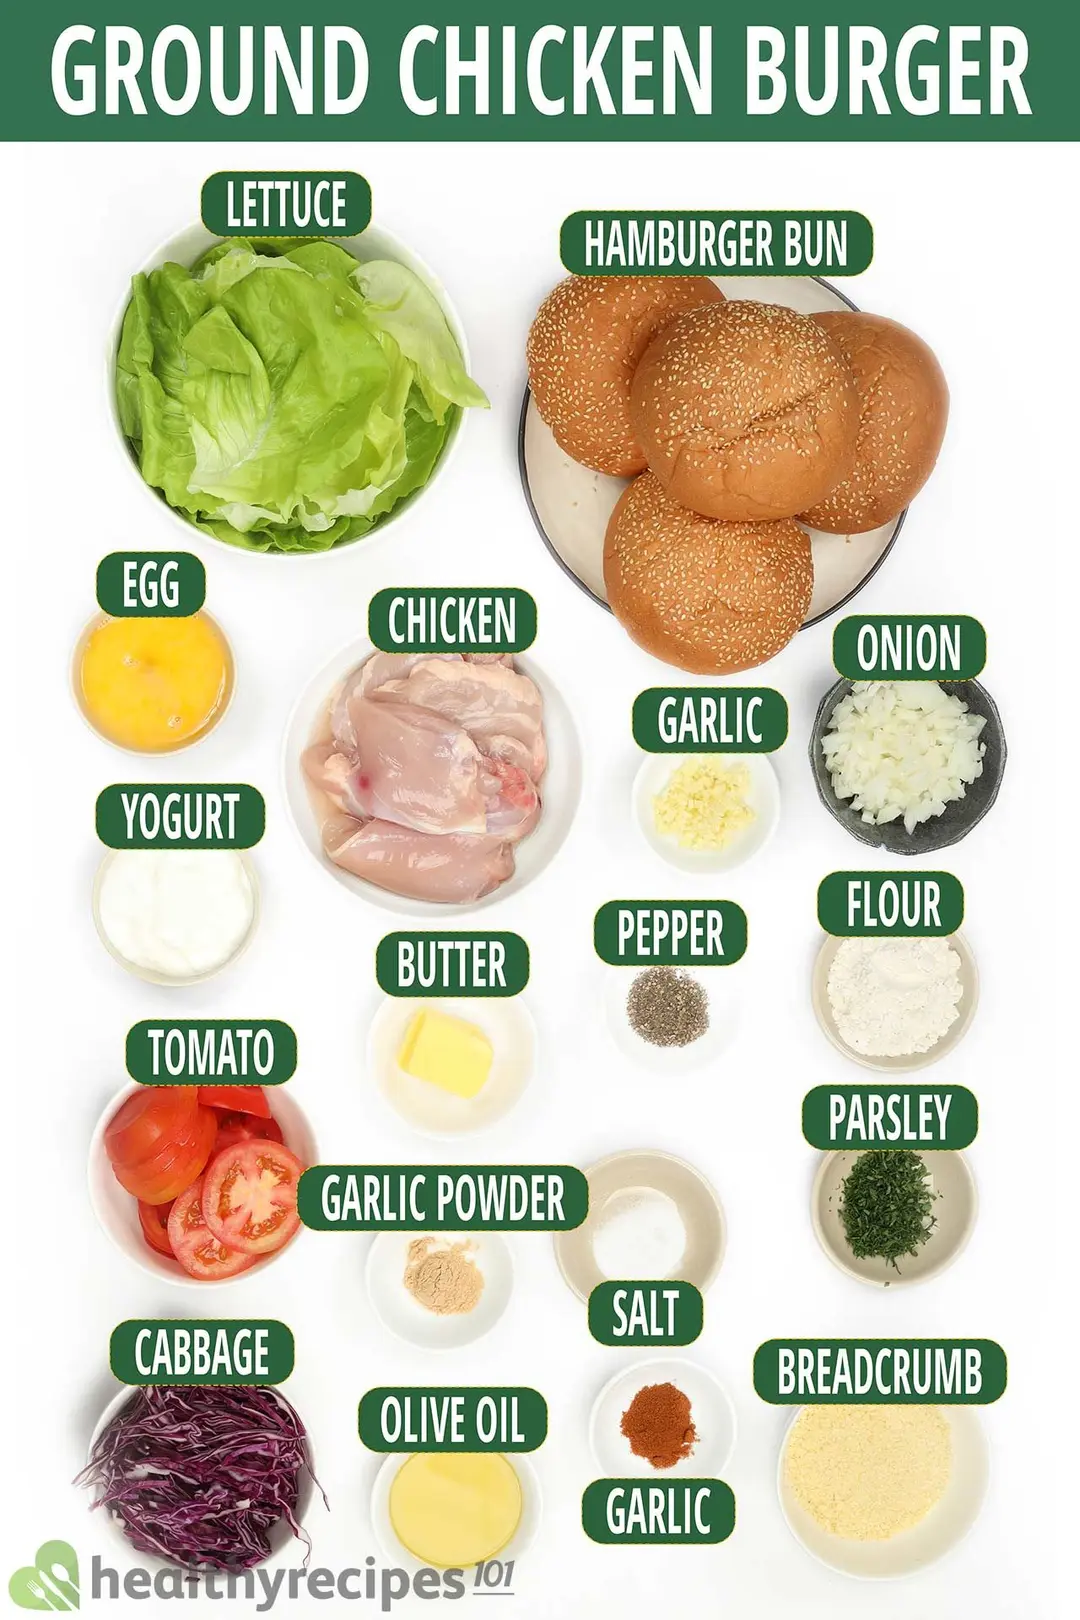 Ingredients for ground chicken burger, including hamburger buns, lettuce leaves, shredded cabbage, tomato slices, raw chicken breasts, and spices